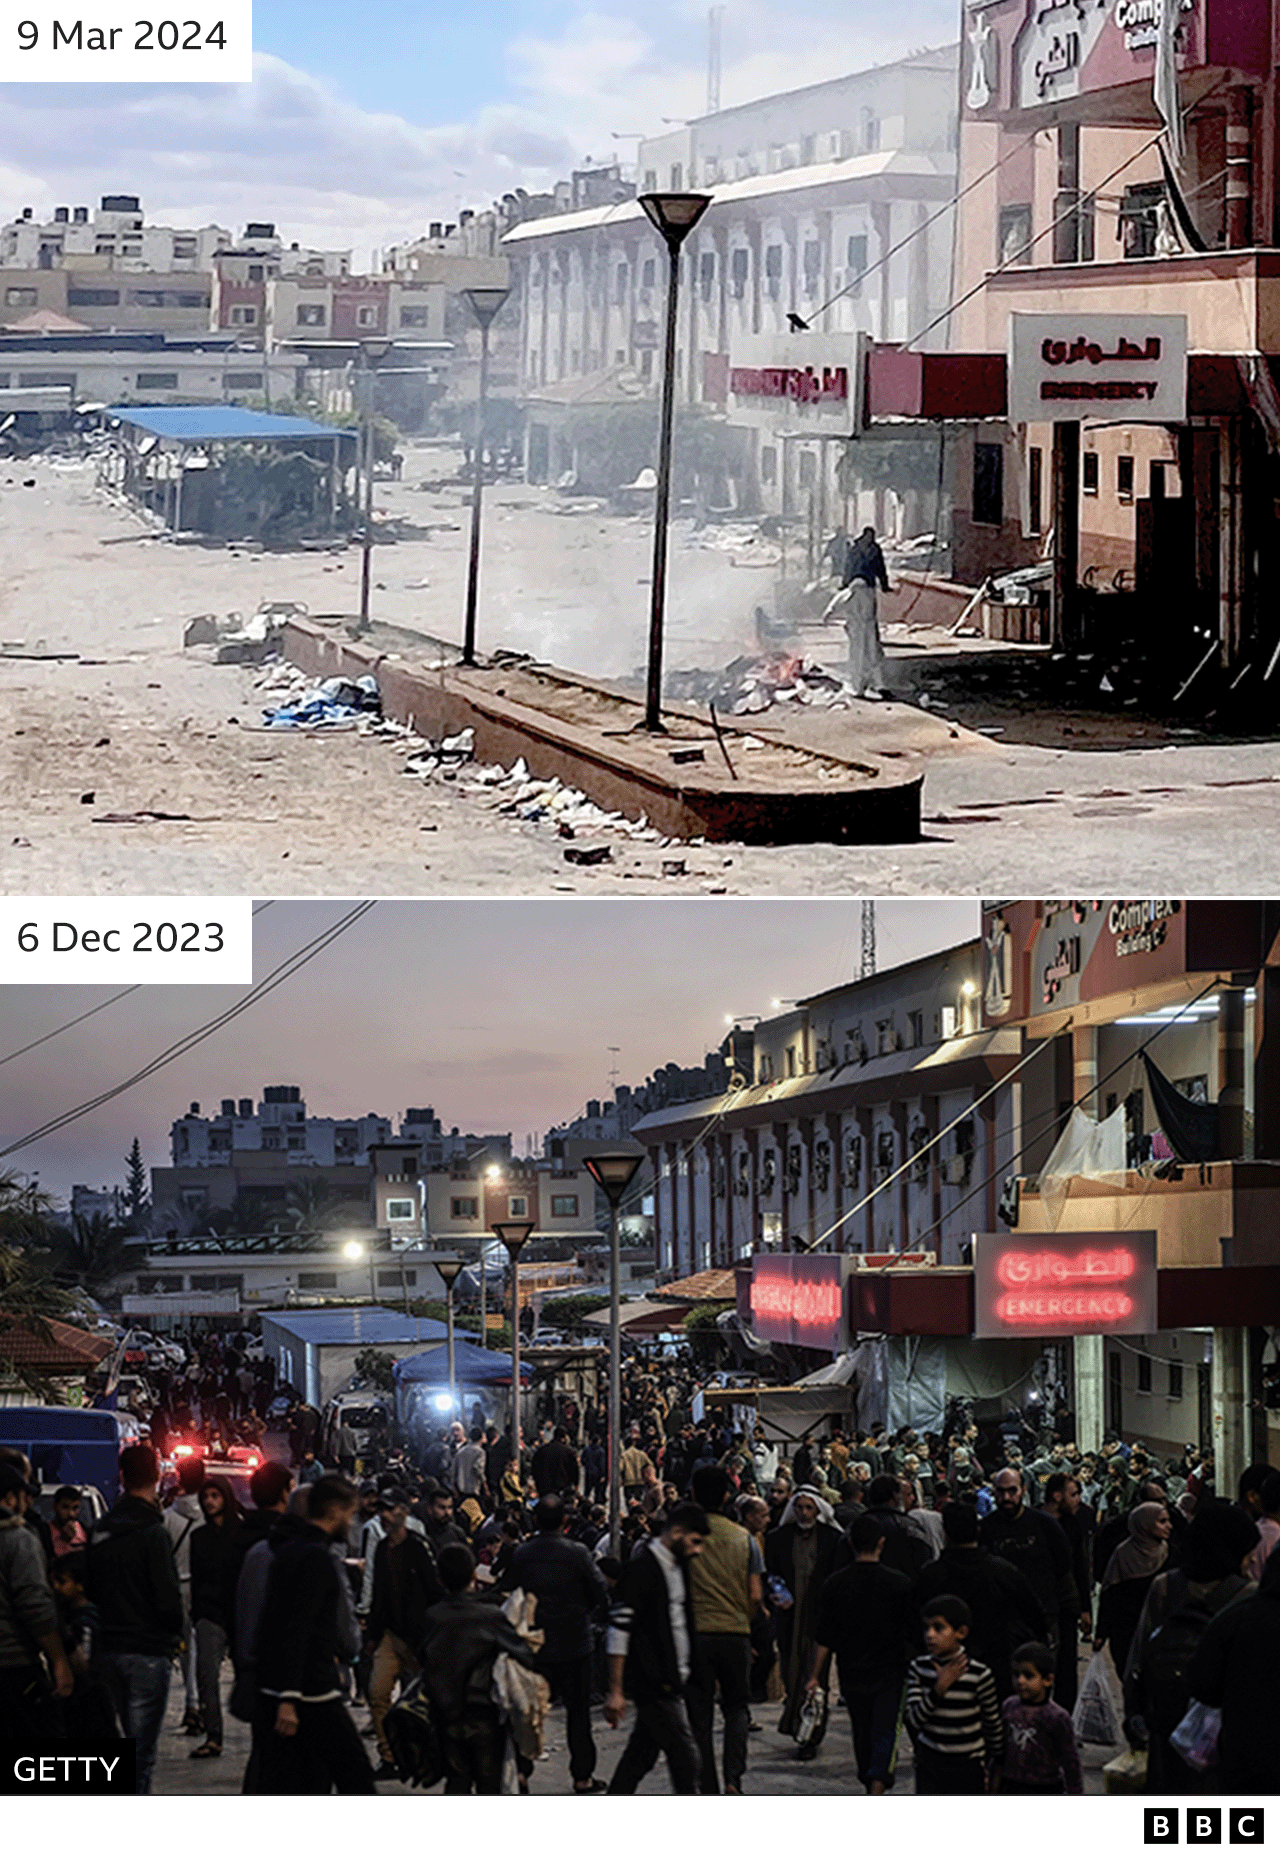 Images showing Nasser hospital in March 2024 and how it looked in December full of people taking shelter